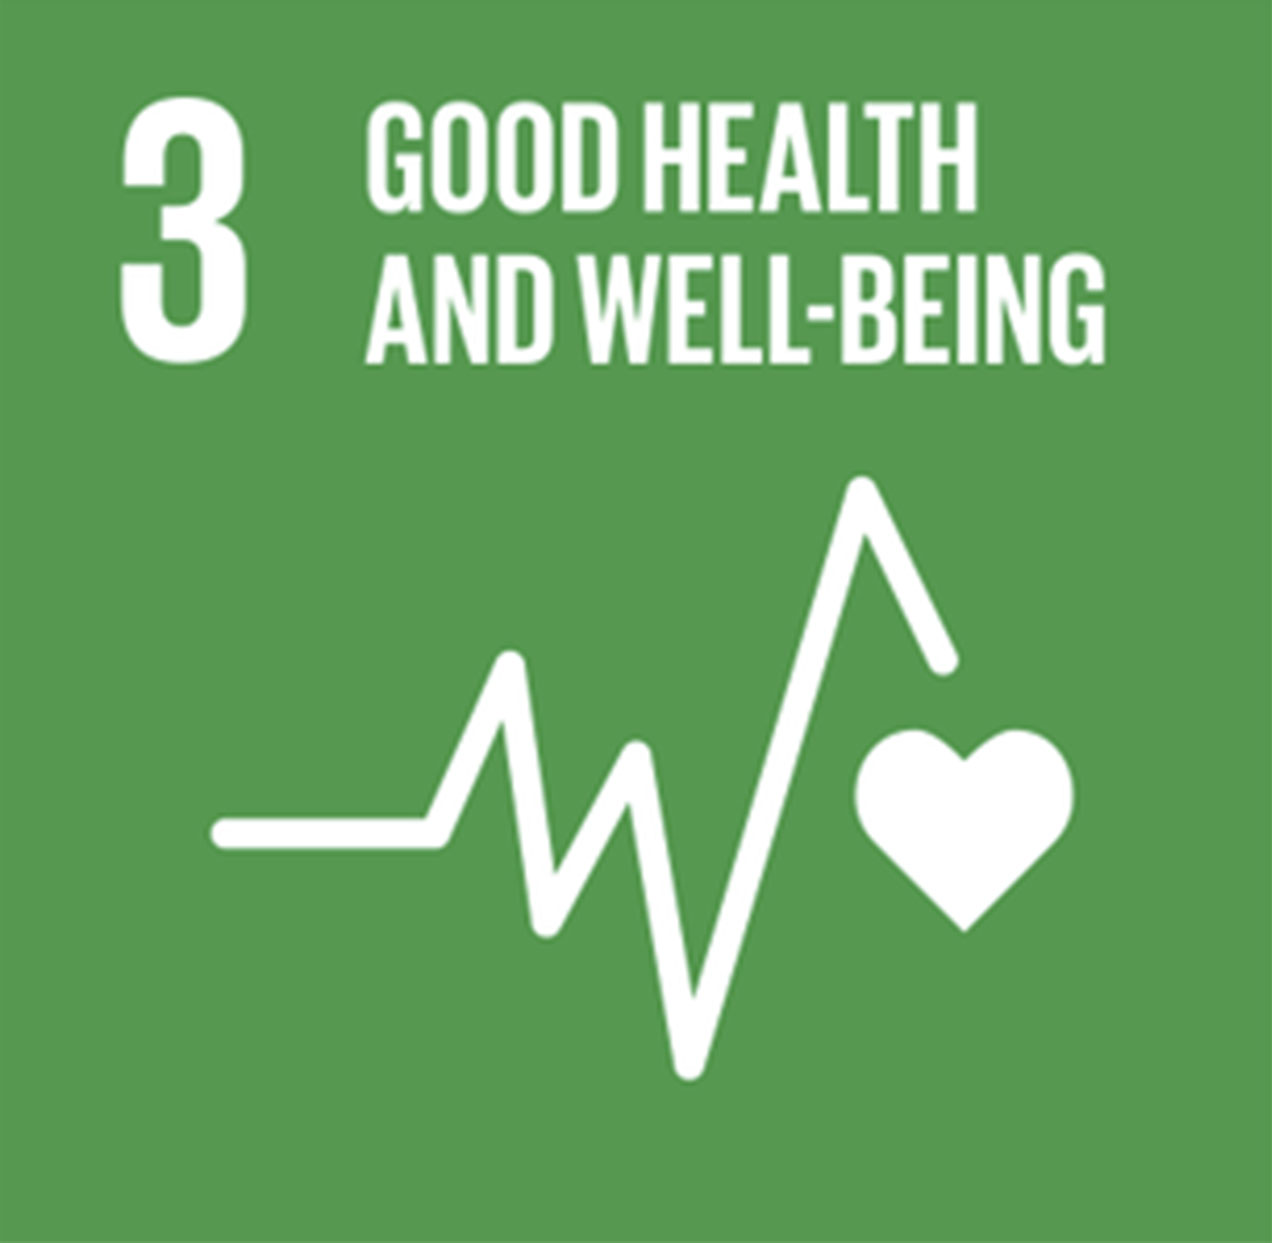 Good Health and Well-Being - #3.jpg